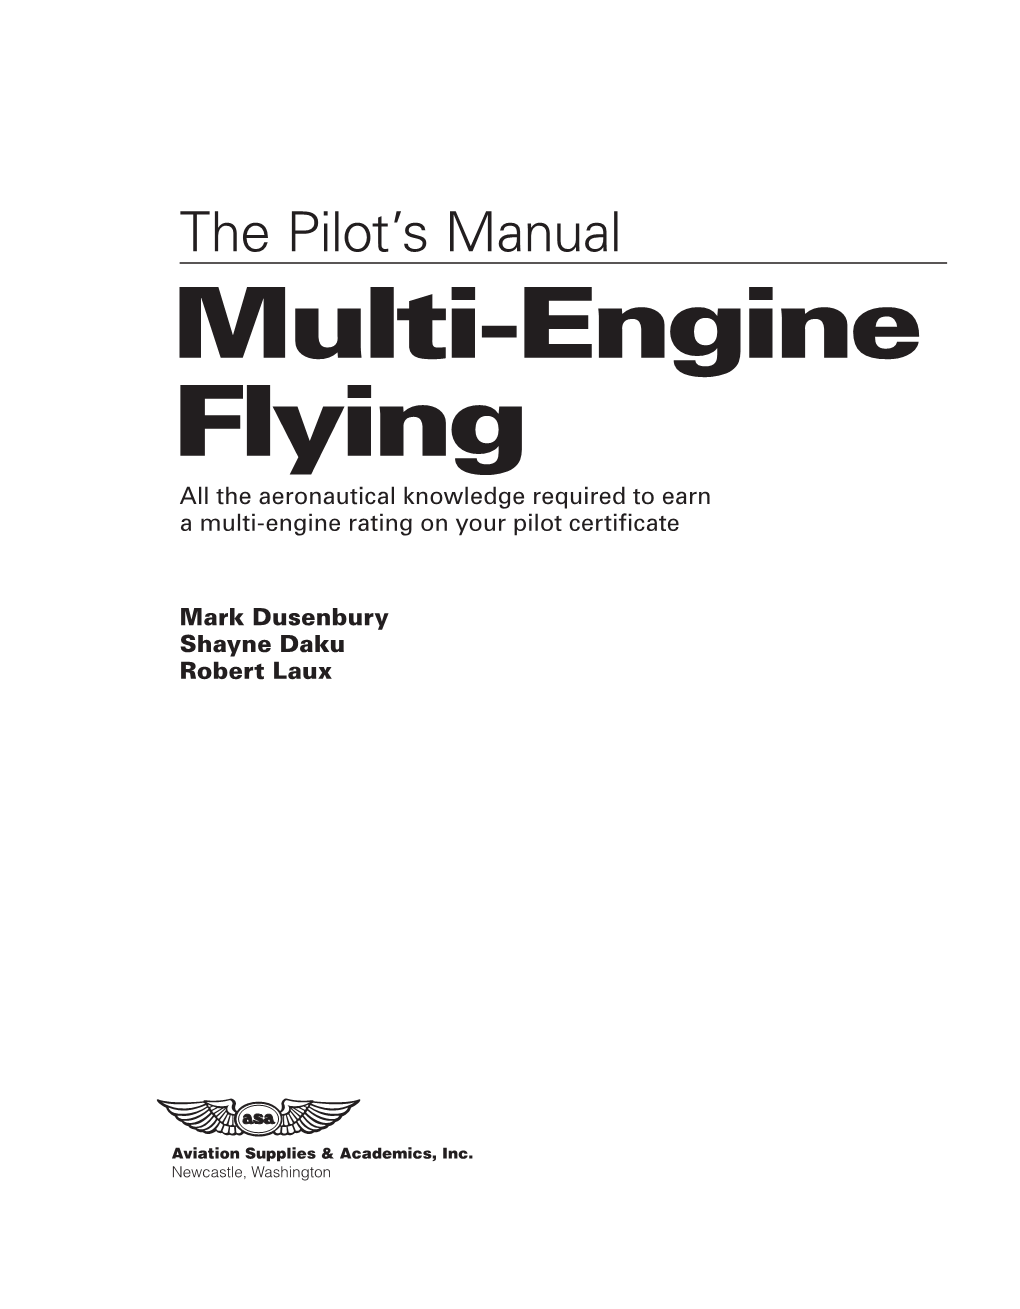 Multi-Engine Flying All the Aeronautical Knowledge Required to Earn a Multi-Engine Rating on Your Pilot Certificate